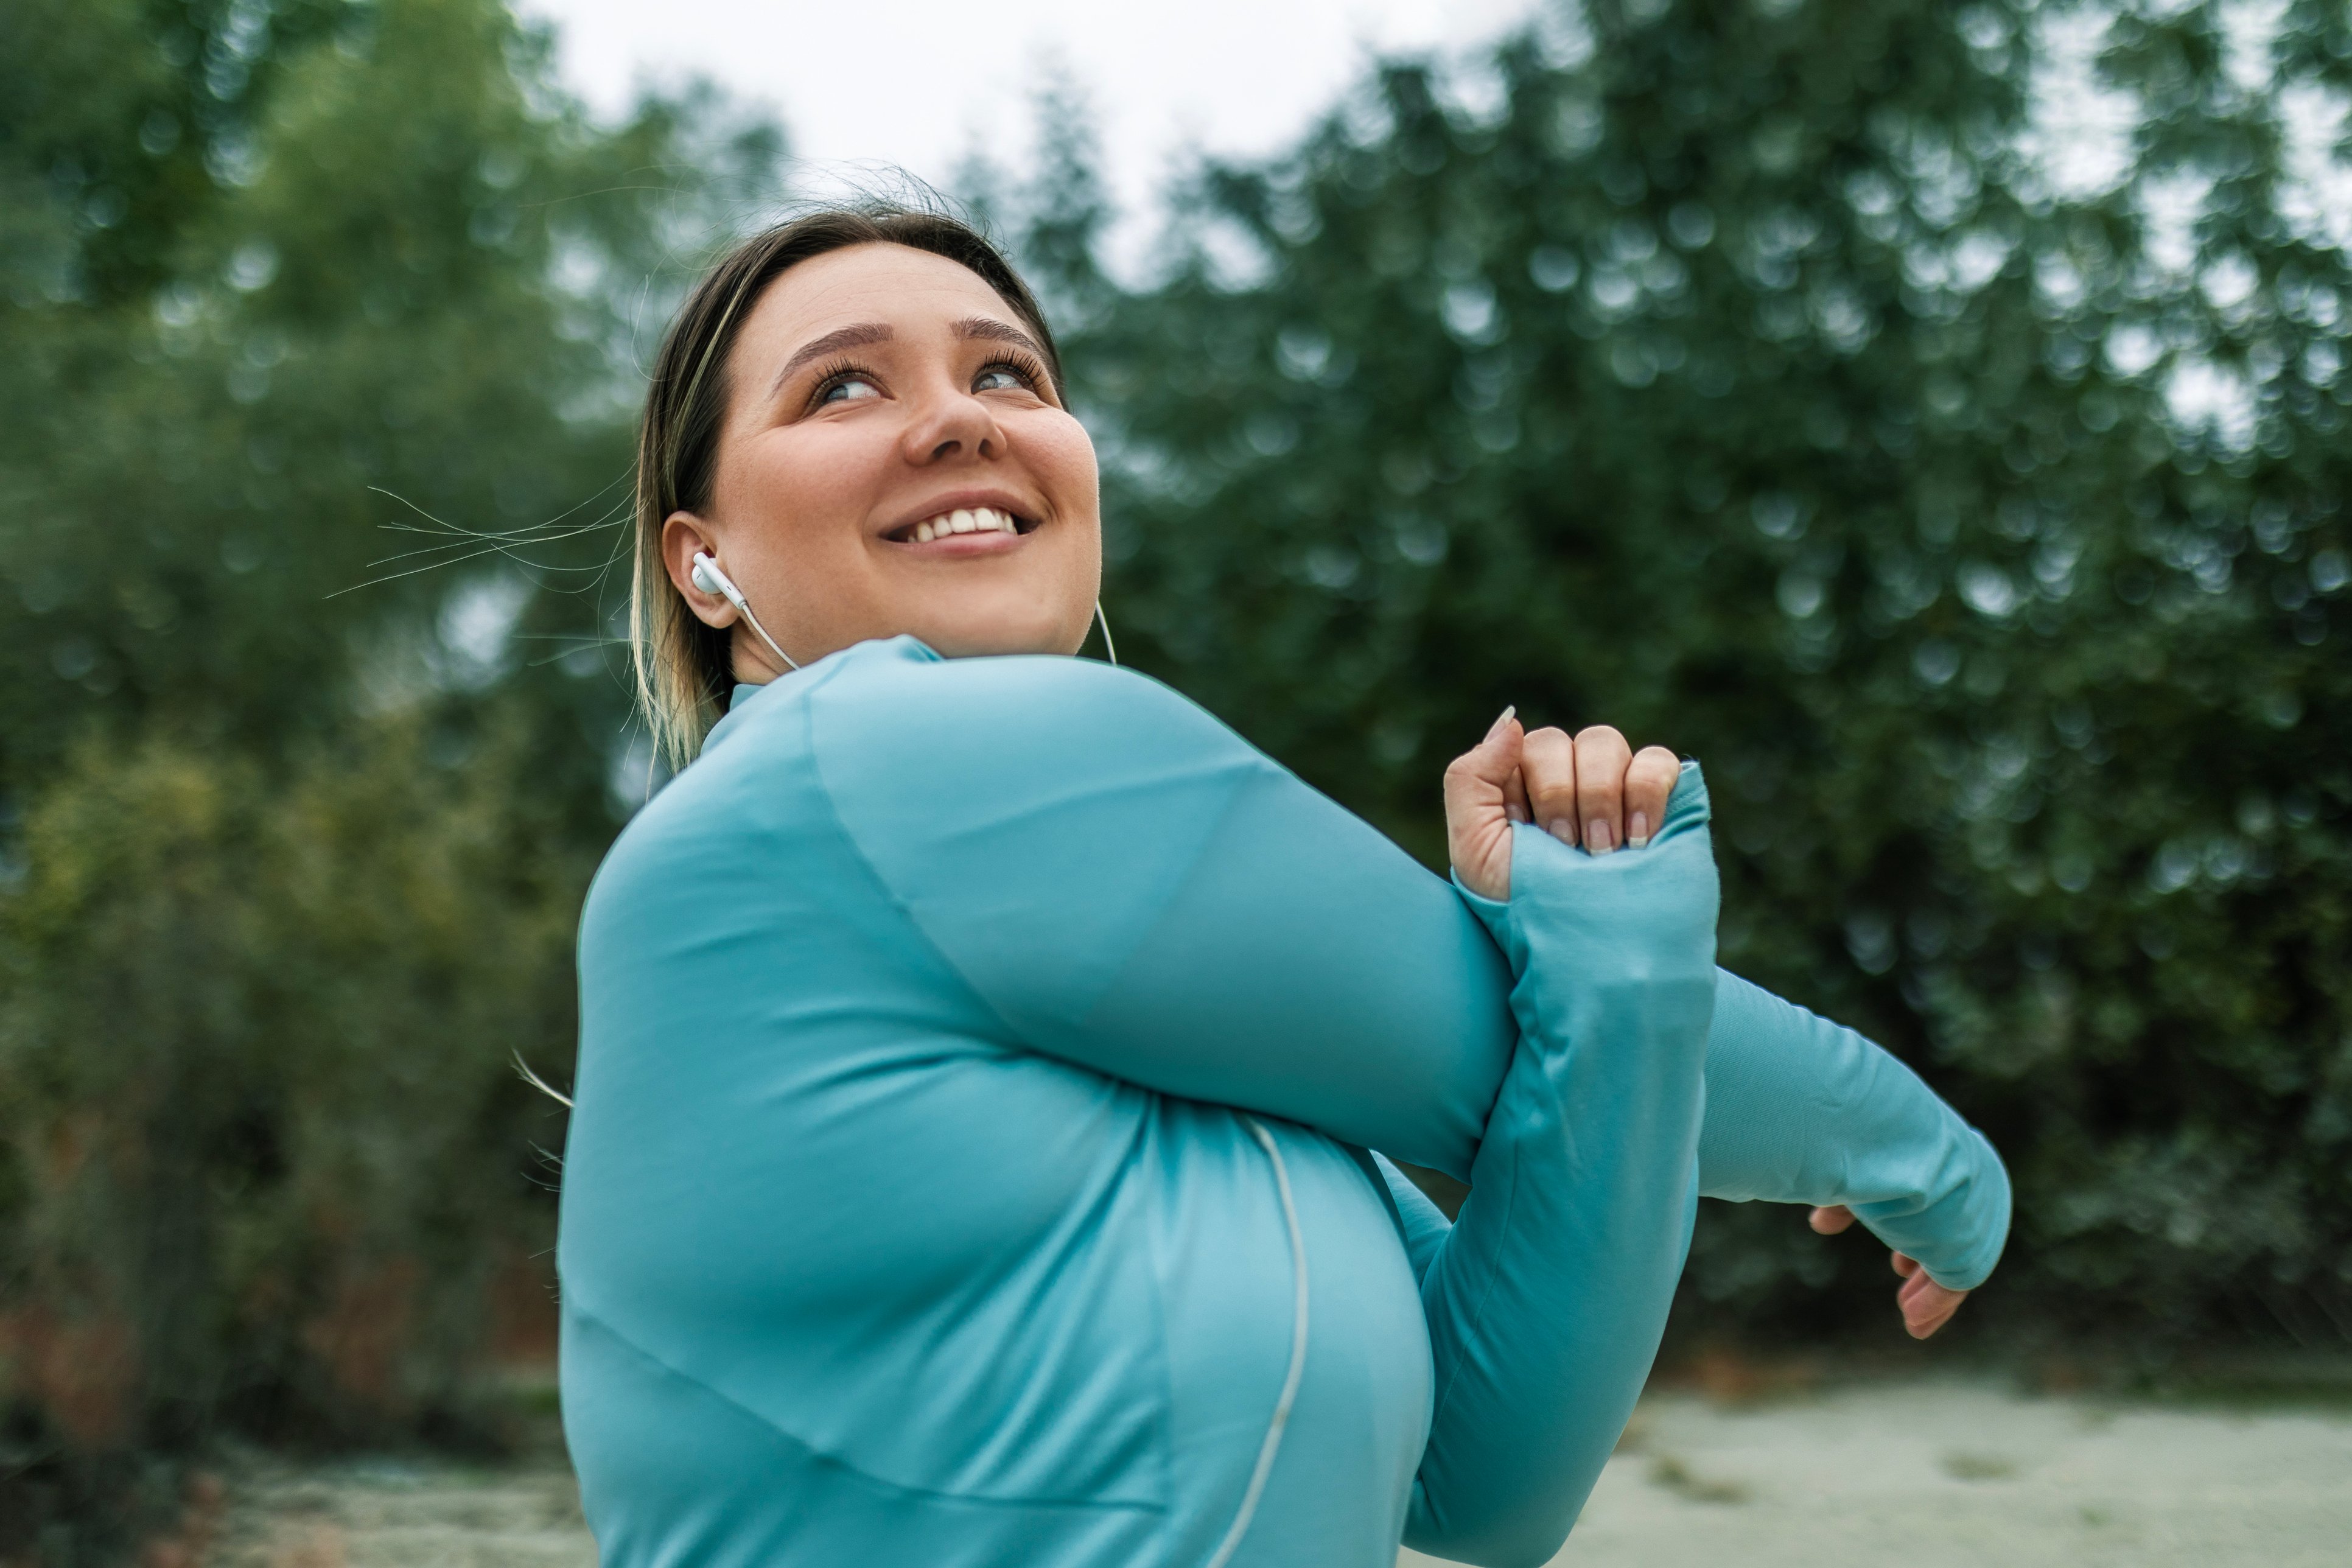 Patients who struggle with weight loss or exercise goals find success with the Healthier You program